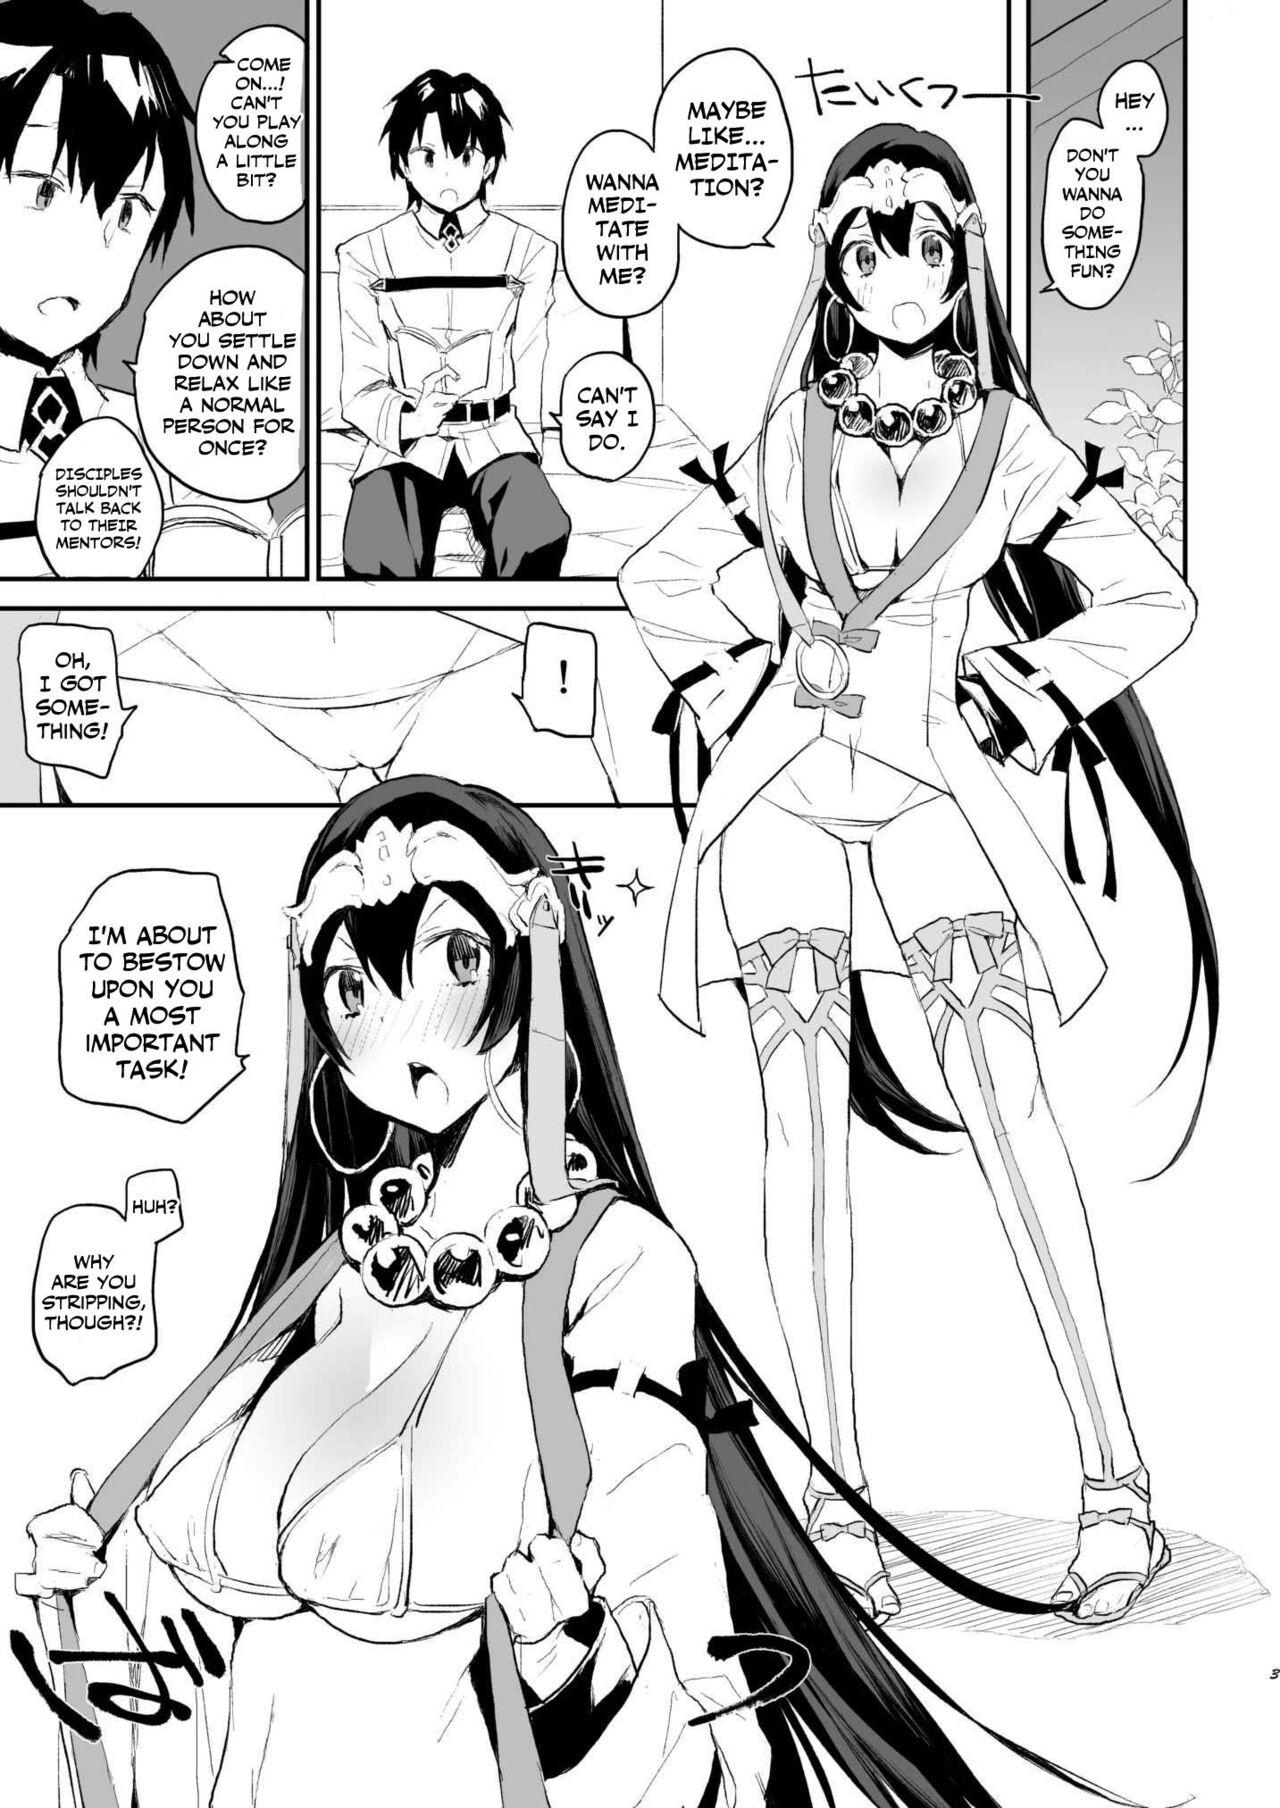 Colombia Kamatte Sanzou-chann!! - Fate grand order Stepmother - Page 3